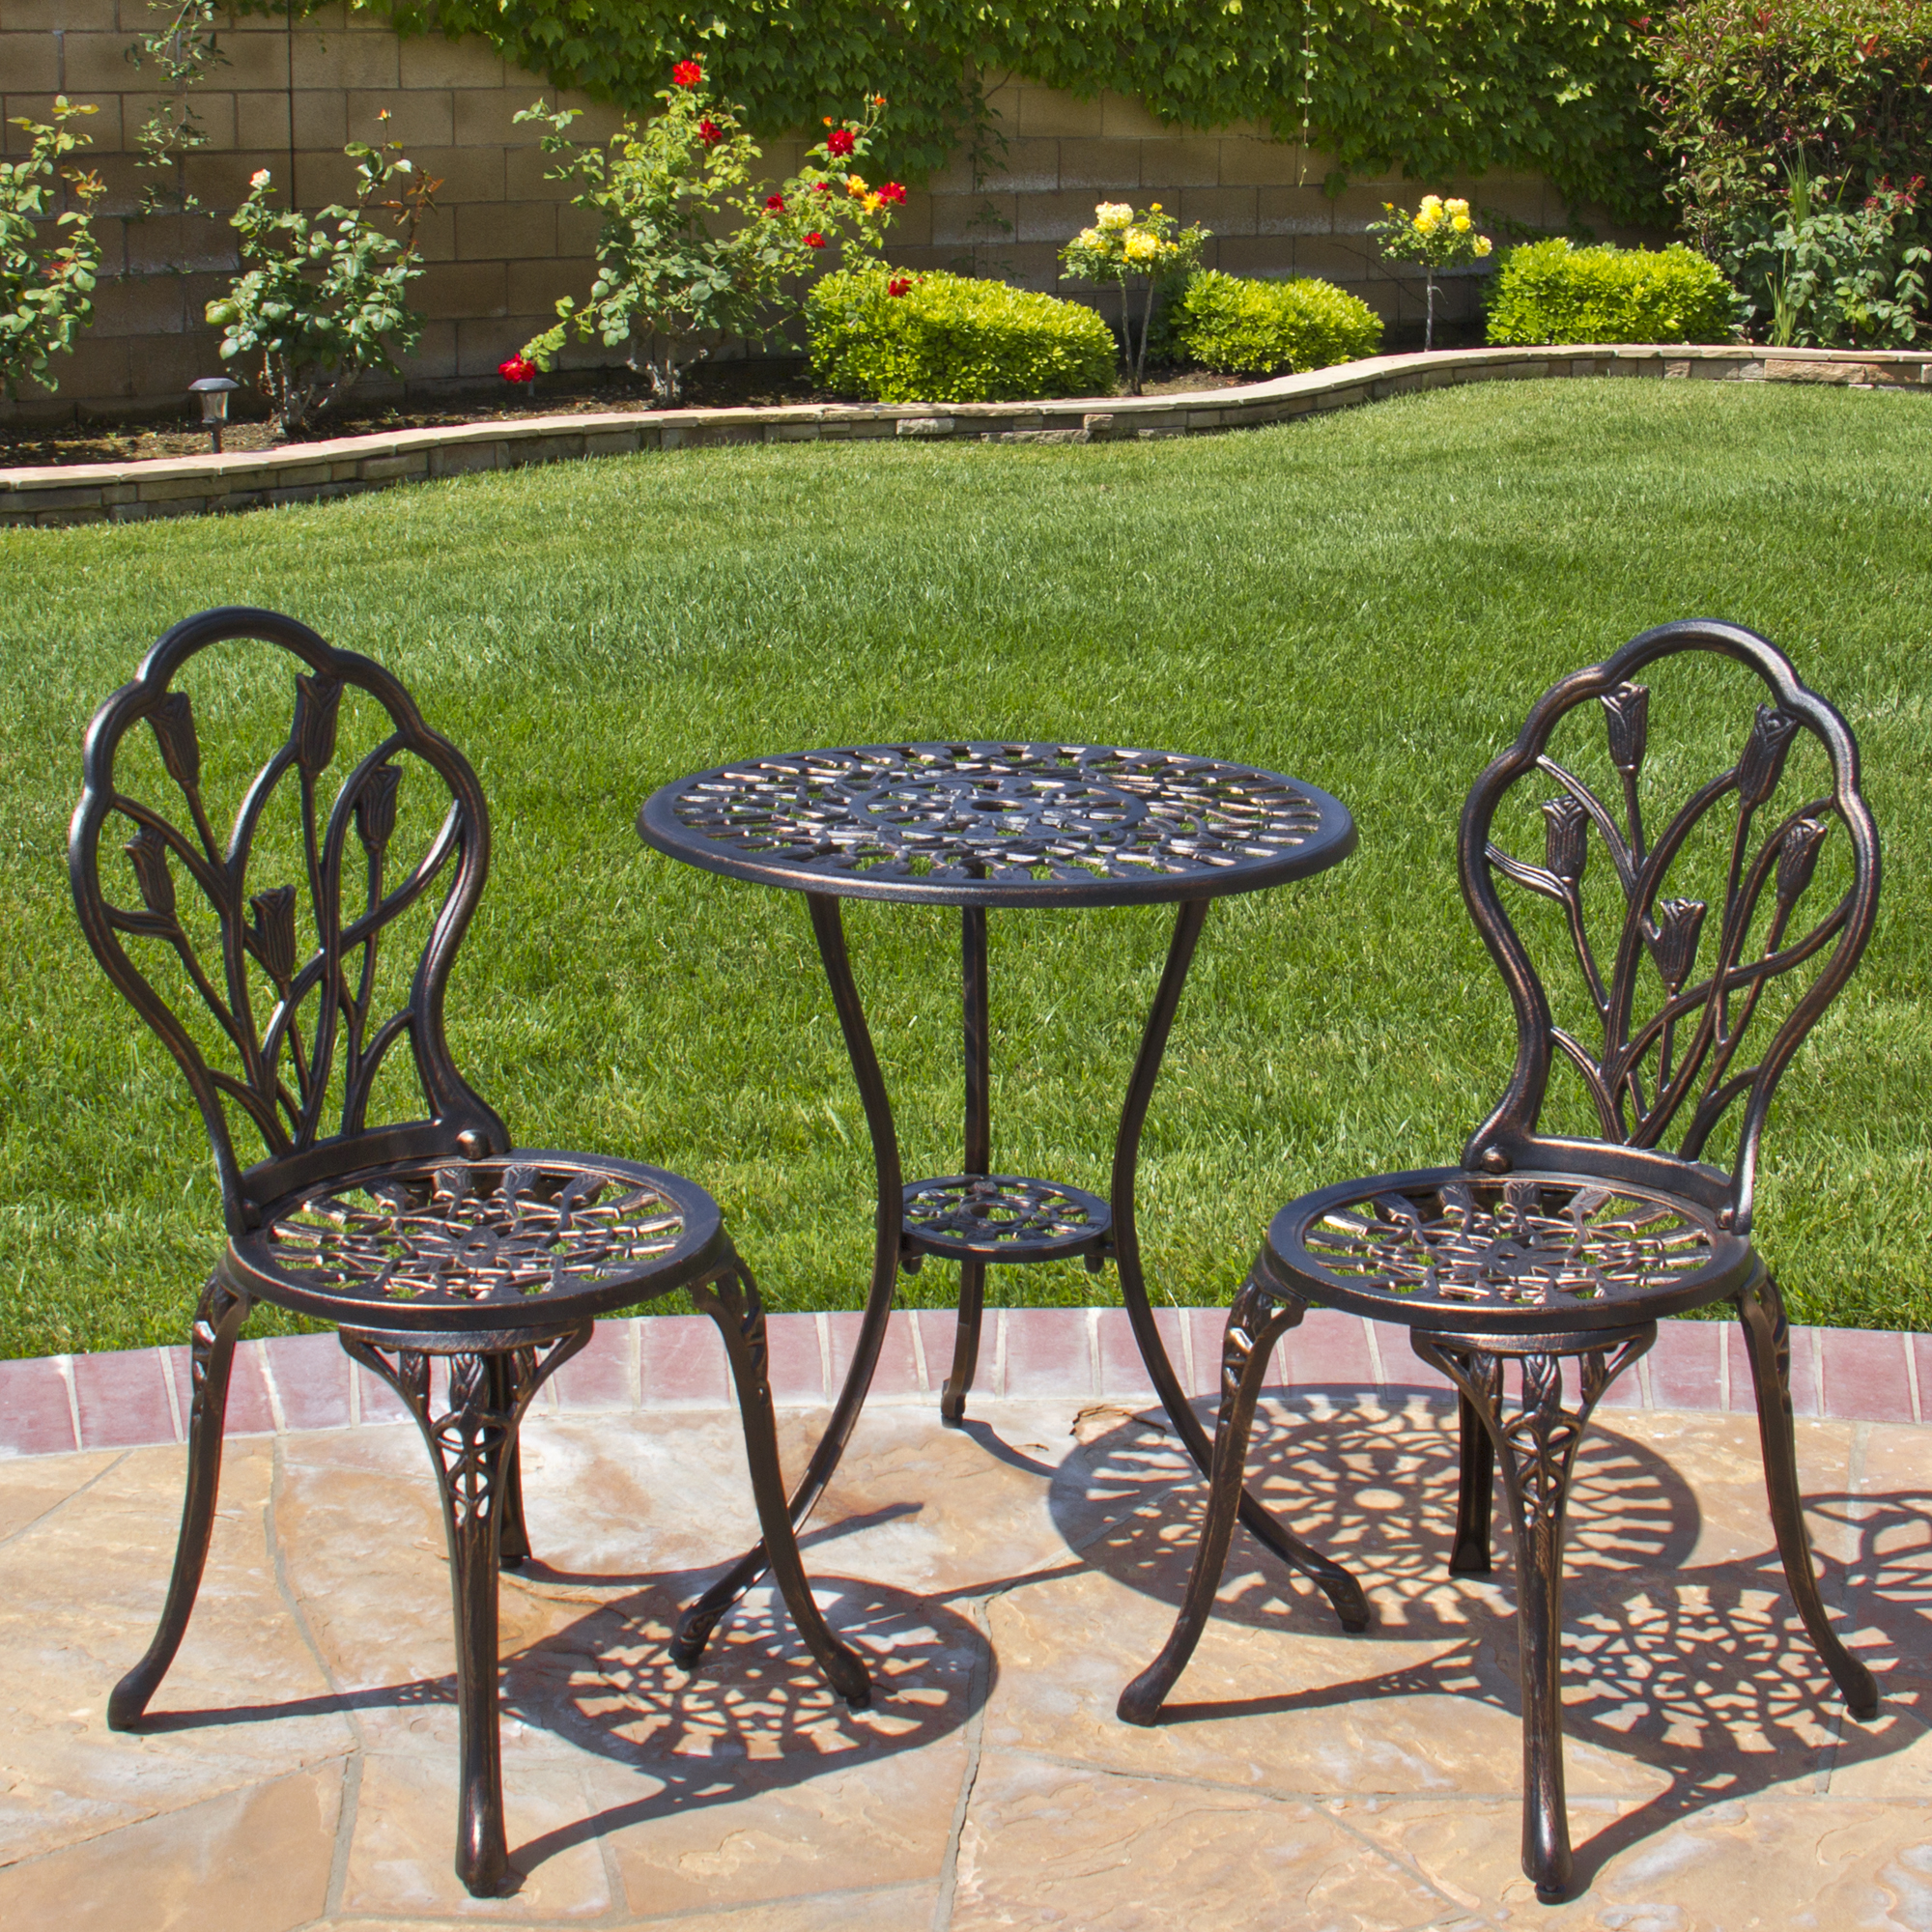 patio table and chairs best choice products cast aluminum patio bistro furniture set in antique RZAJIFV